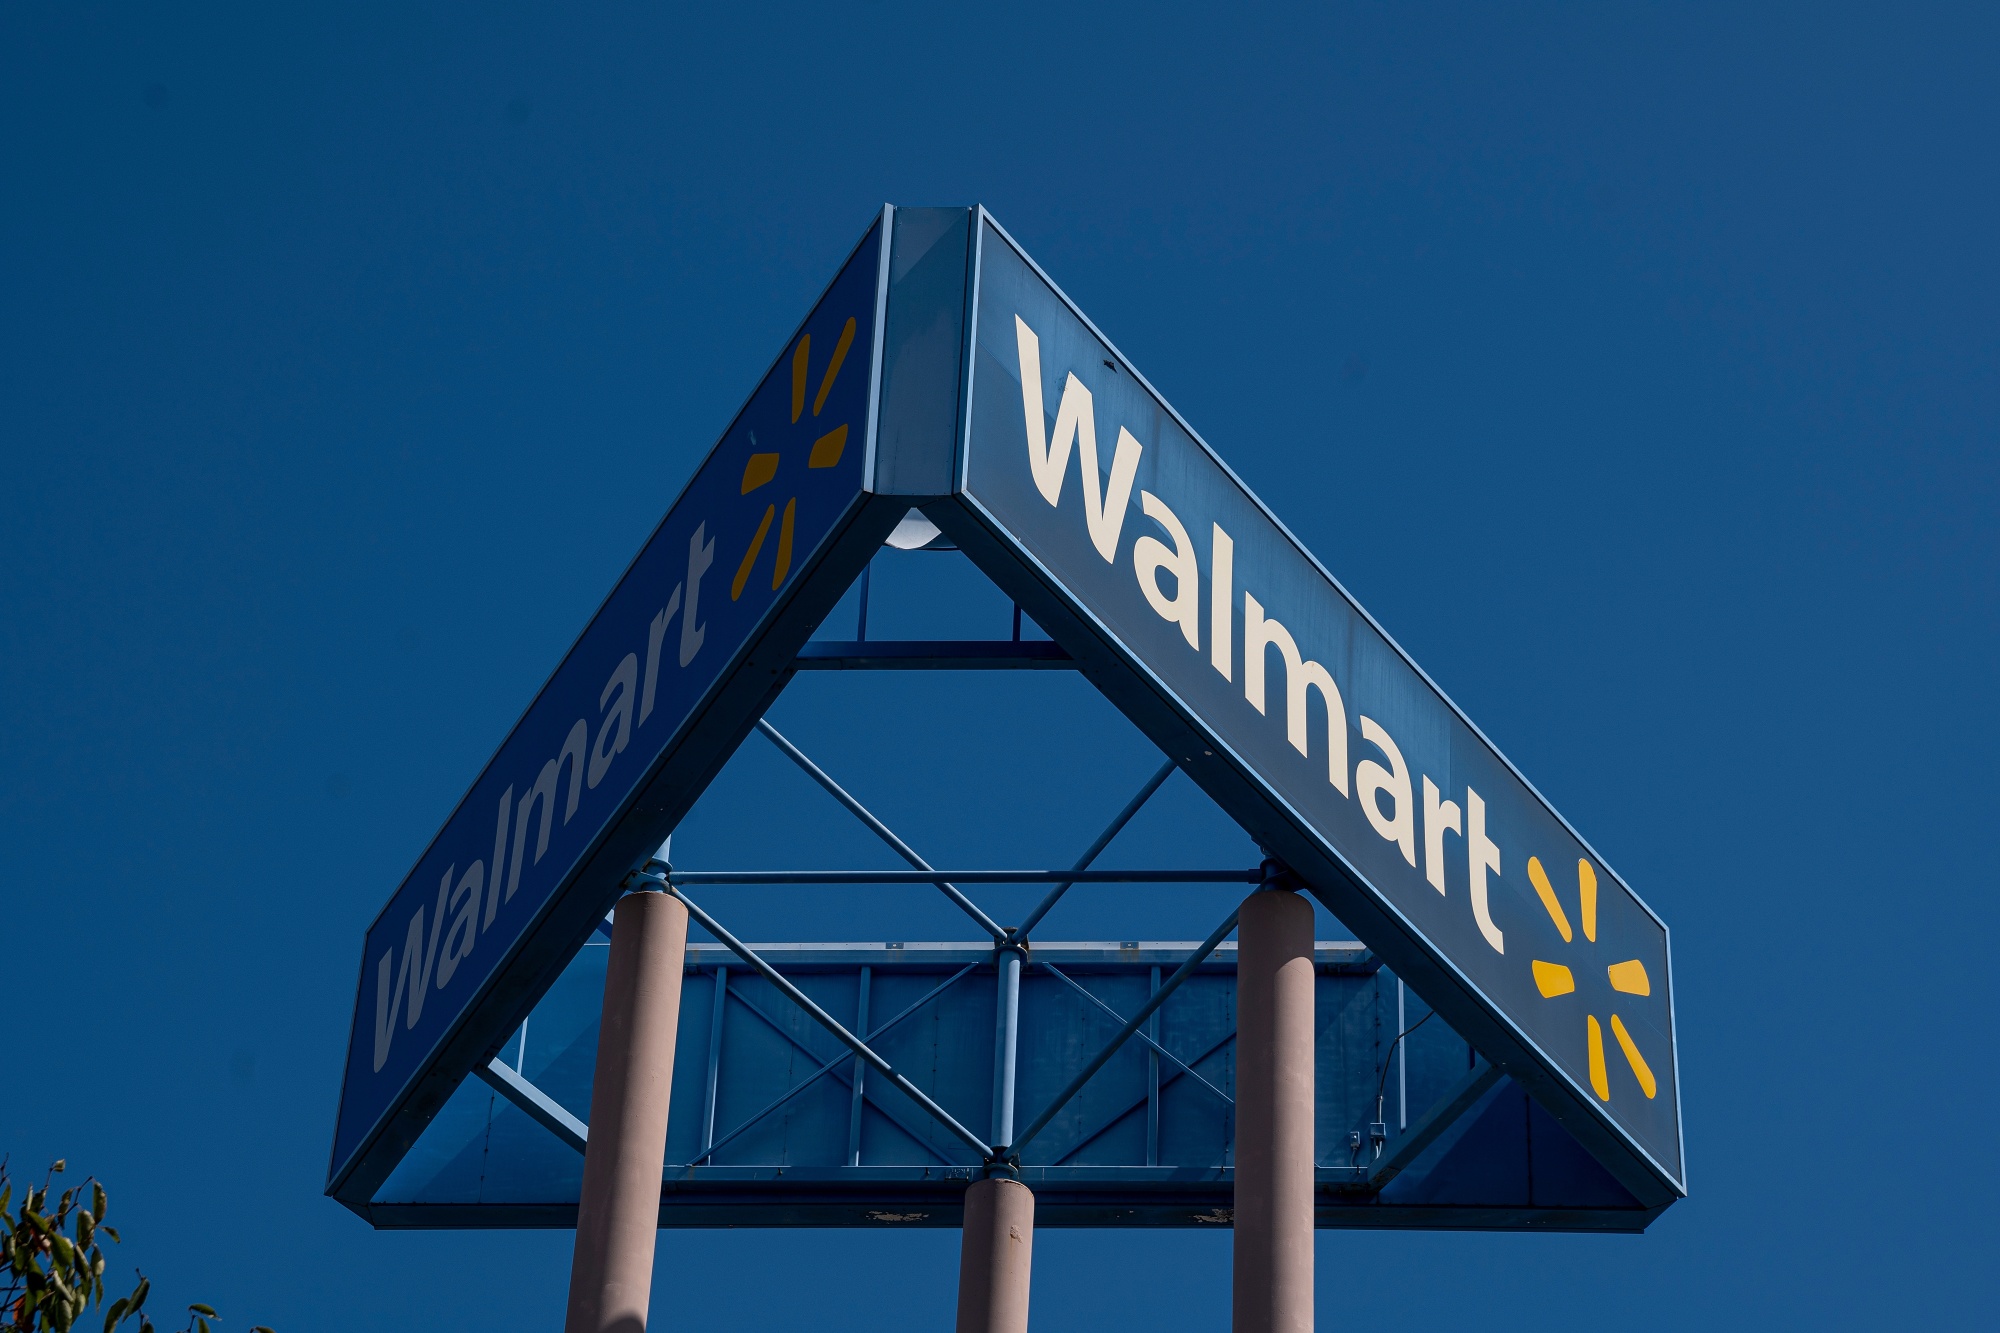 Walmart Raises Starting Wages for Store Workers - The New York Times